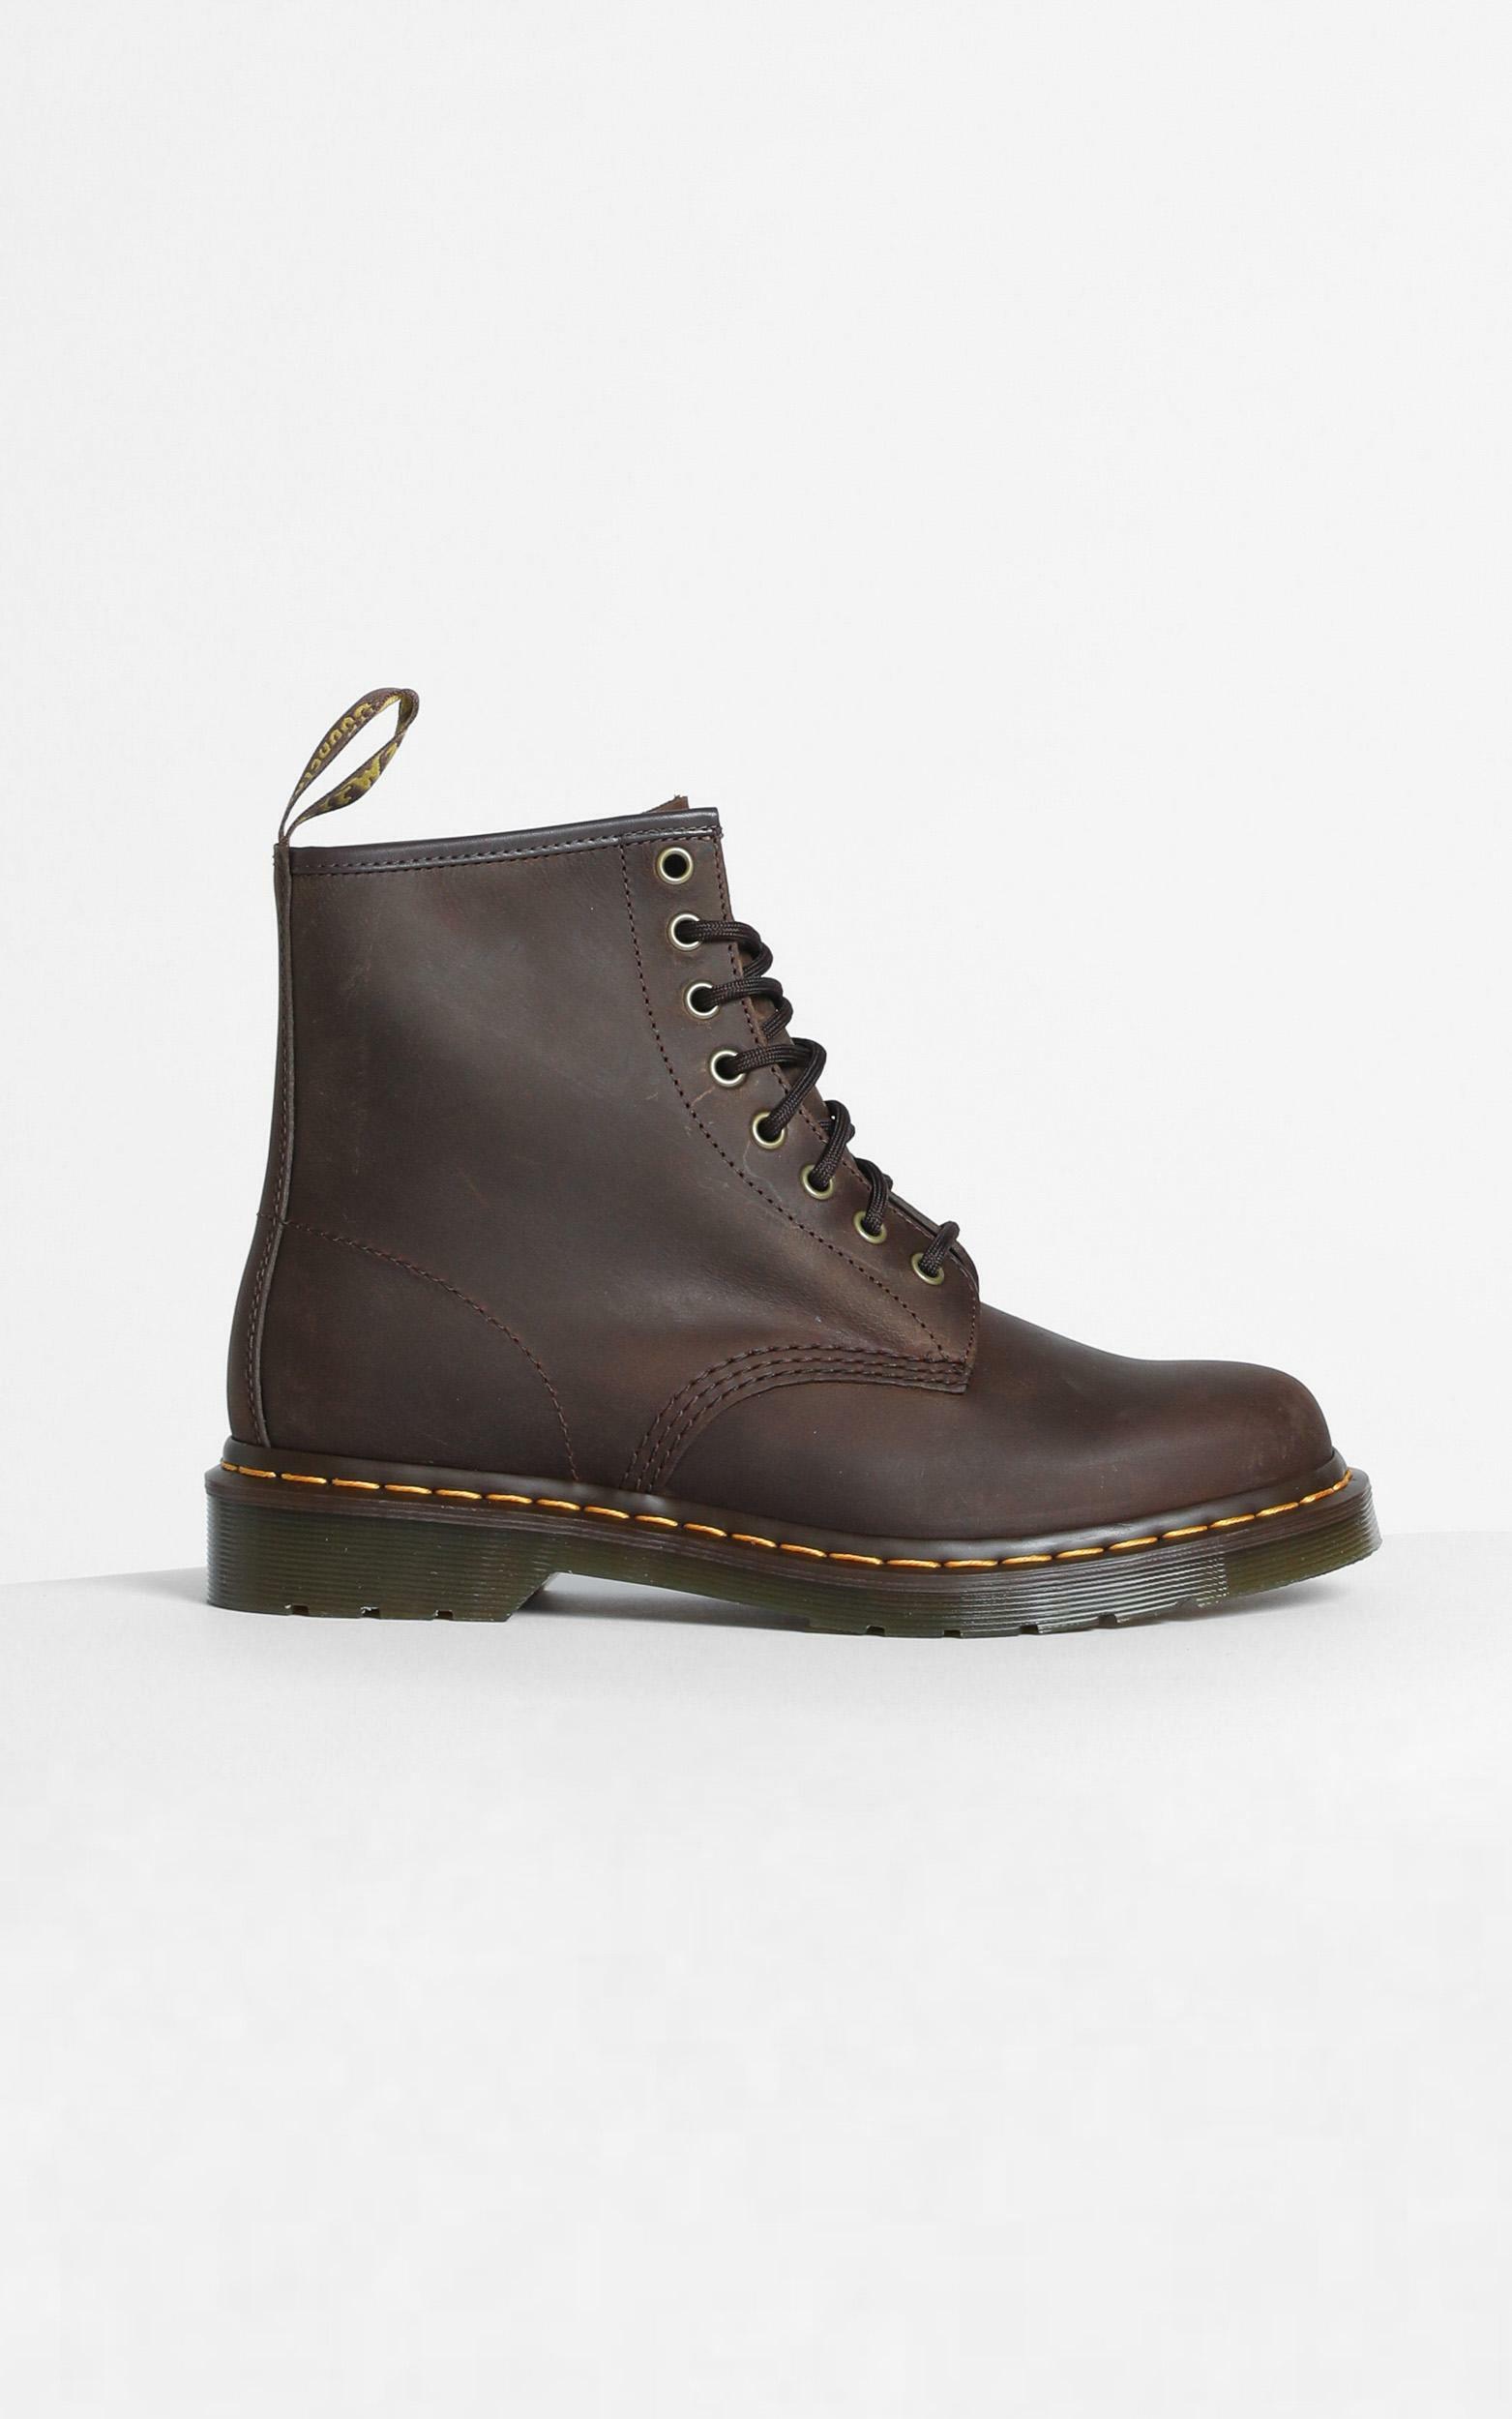 Dr. Martens - 1460 8 Eye Boot in Gaucho Crazy Horse - 05, BRN1, hi-res image number null